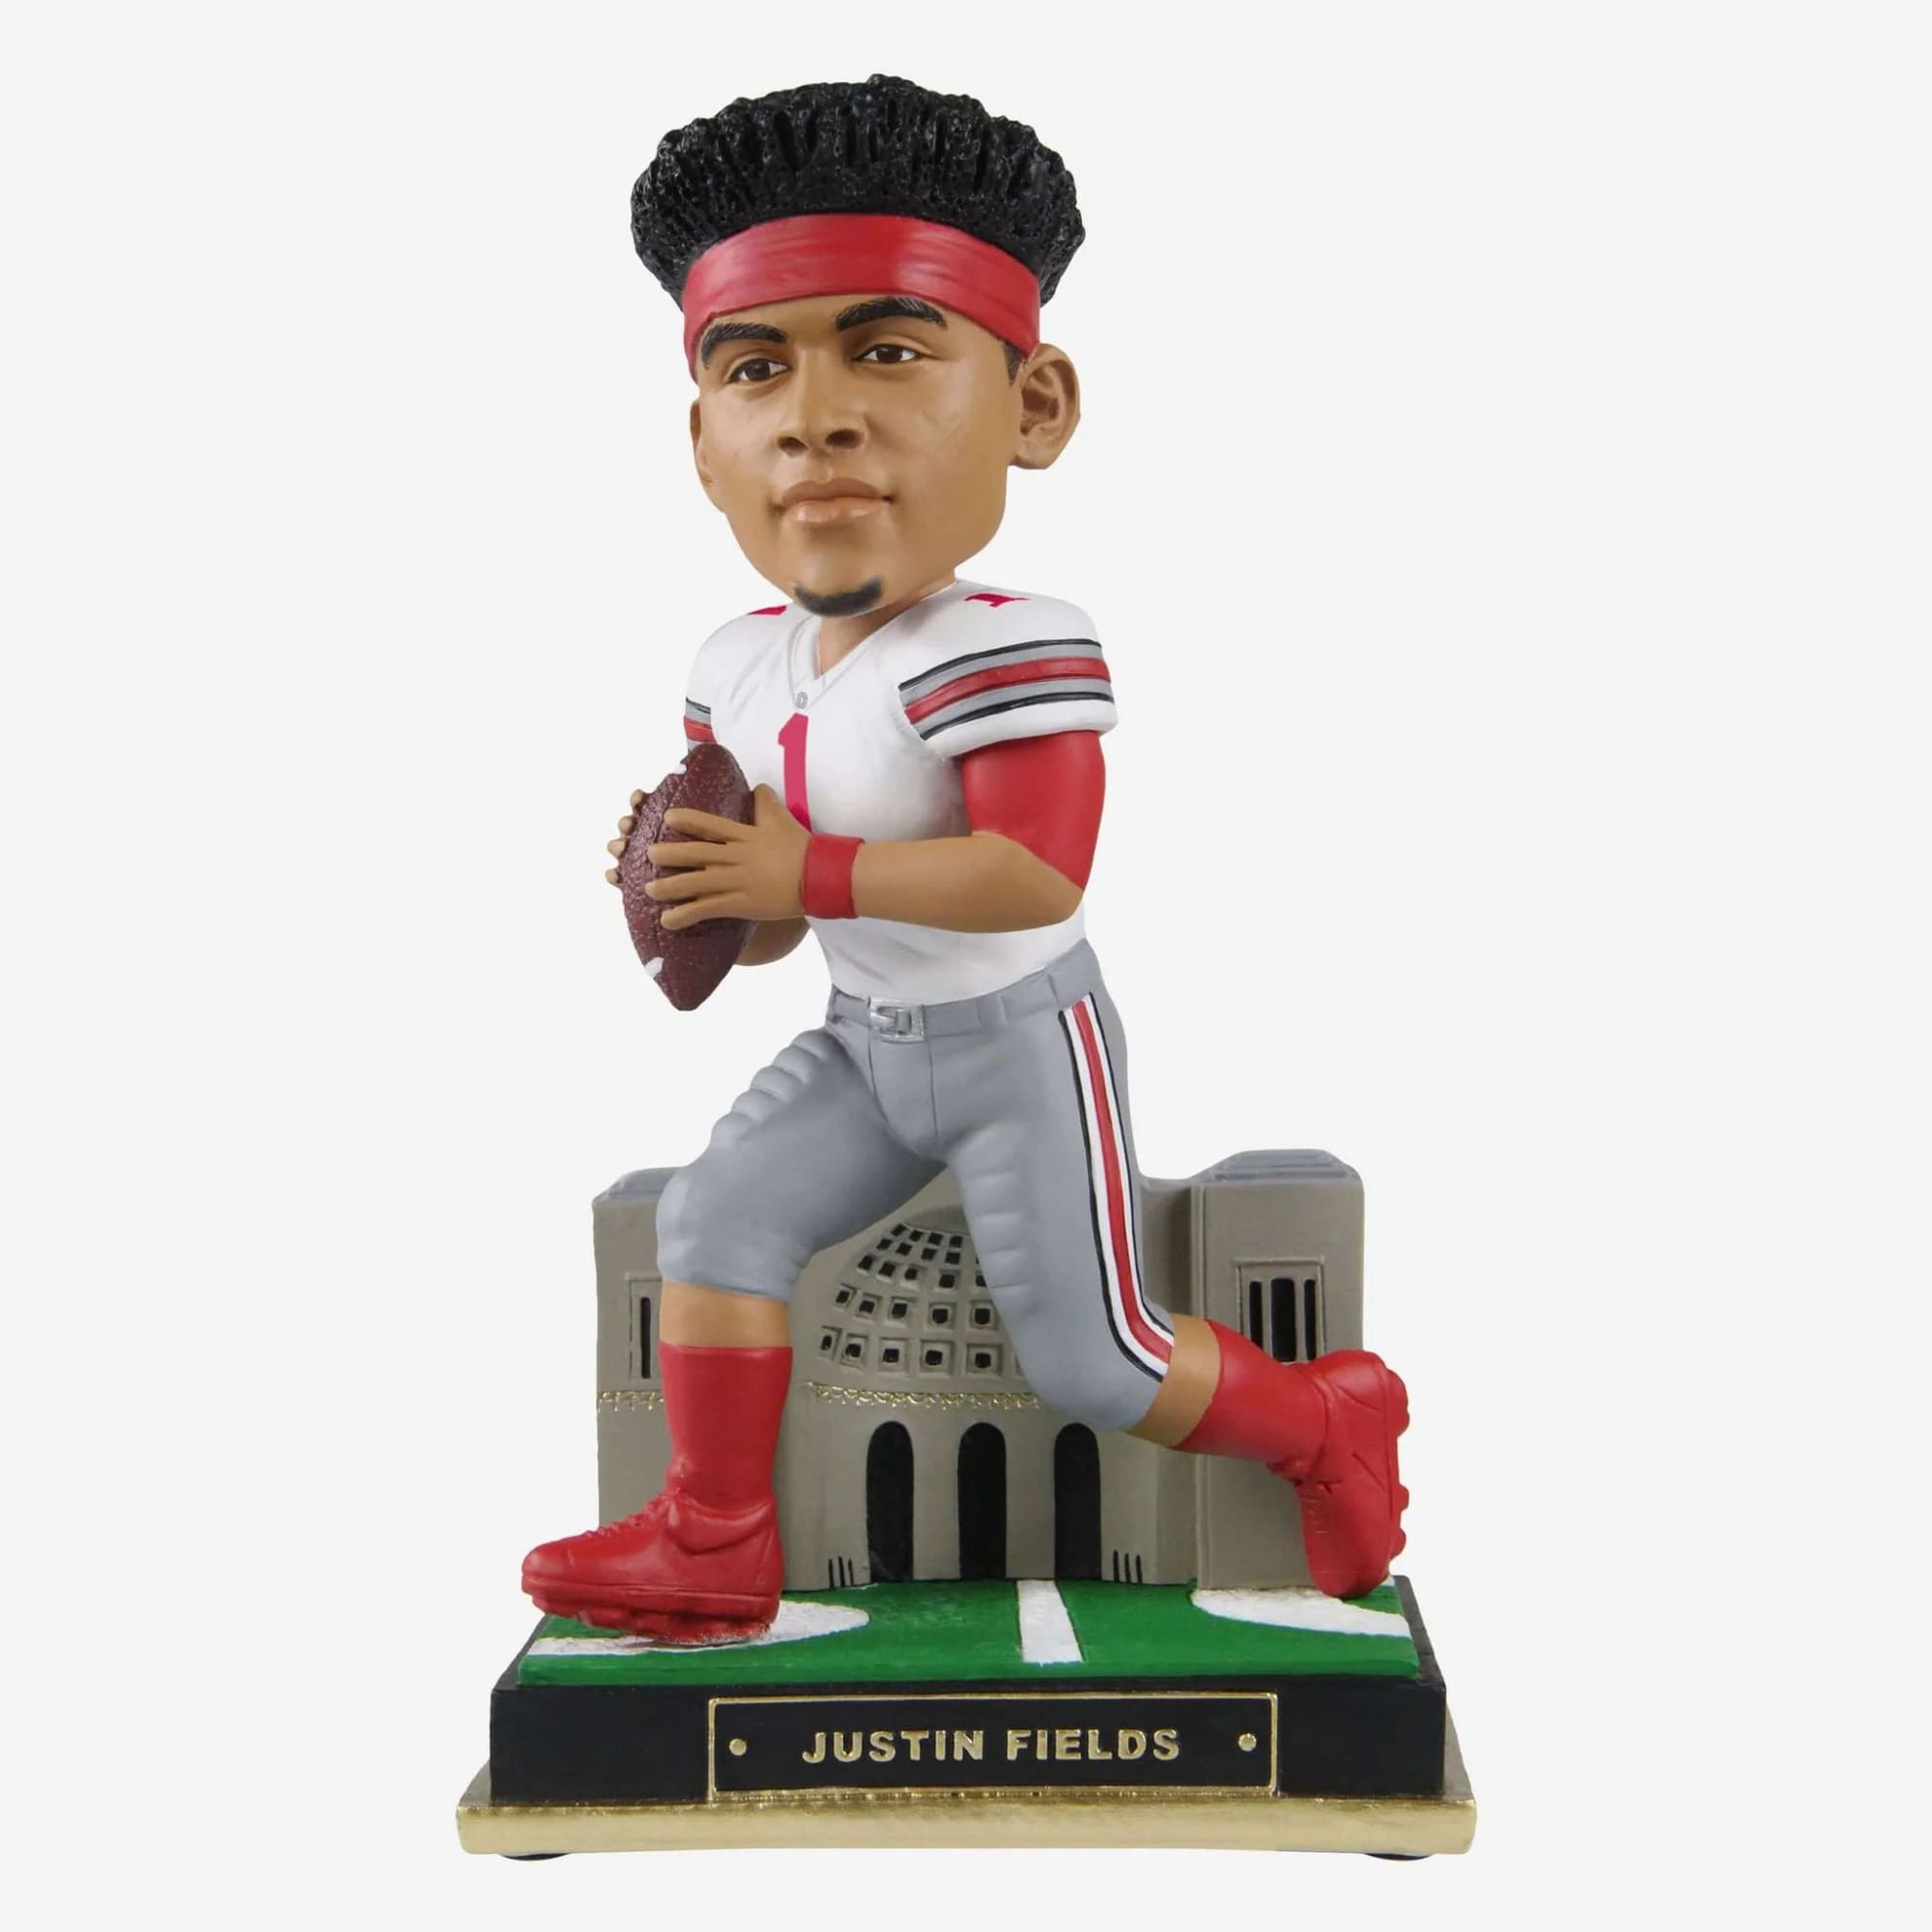 Fans need these limited-edition Ohio State Buckeyes bobbleheads.